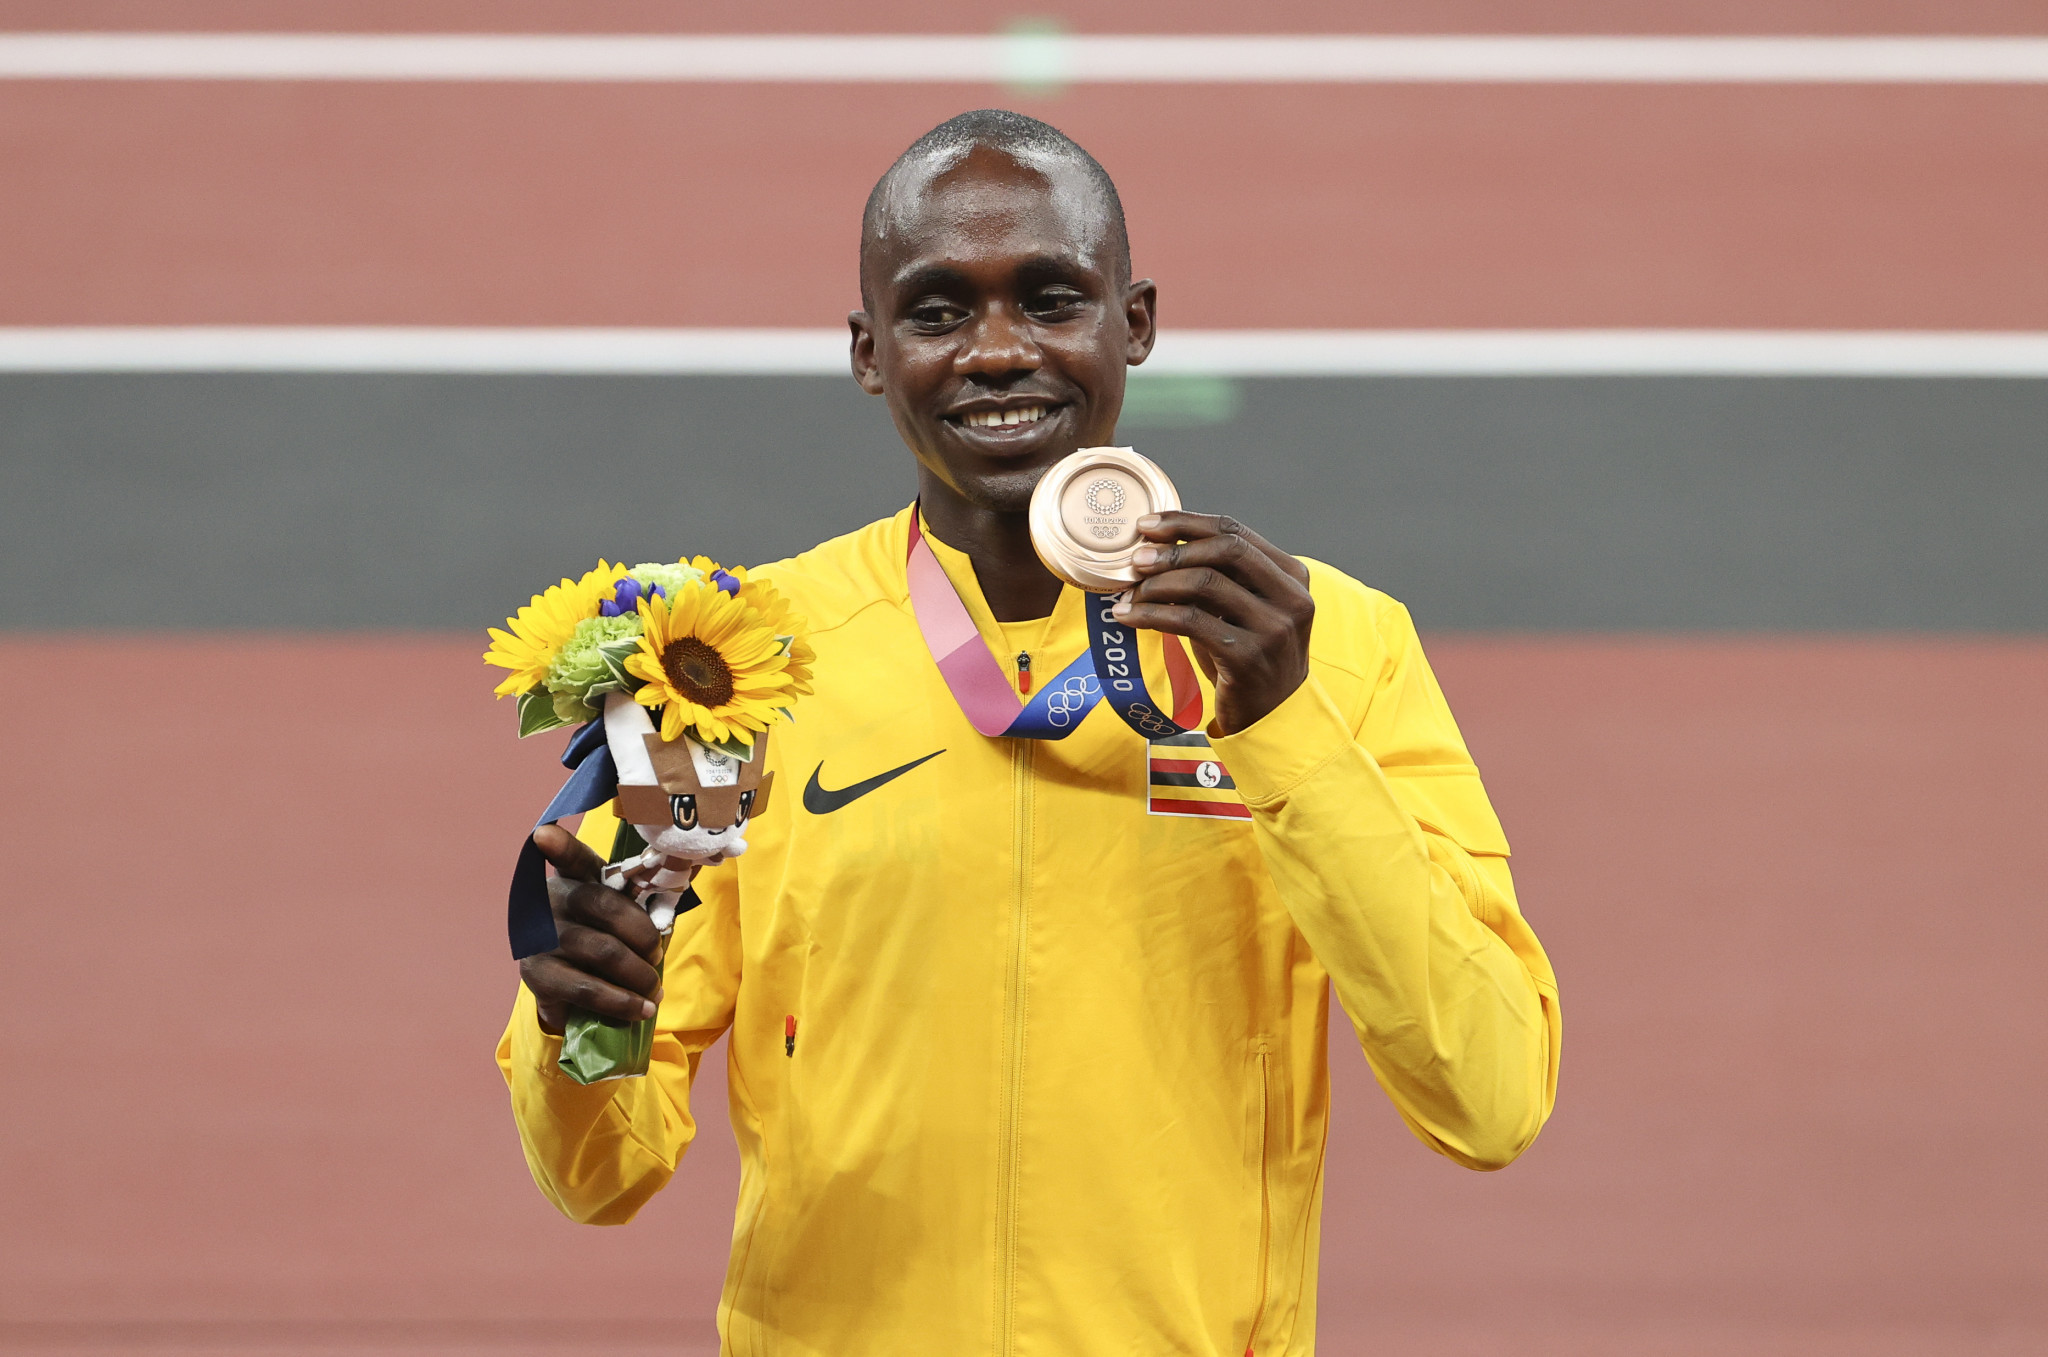 Jacob Kiplimo earned a bronze medal for Uganda in the men's 10,000 metres at the Tokyo 2020 Olympic Games ©Getty Images